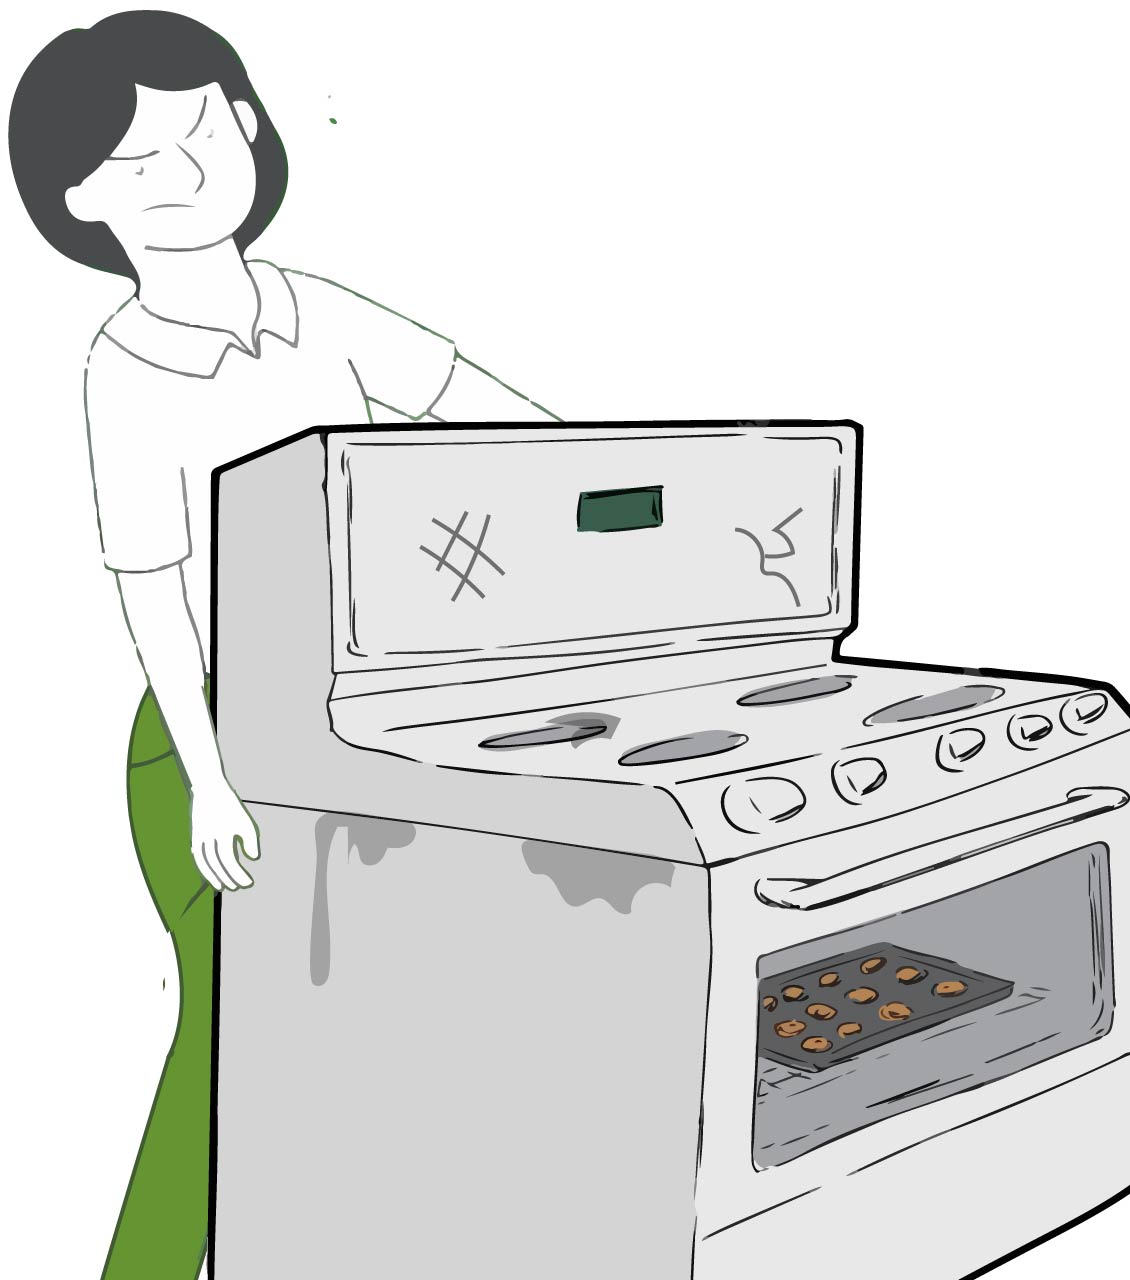 W oven removal services